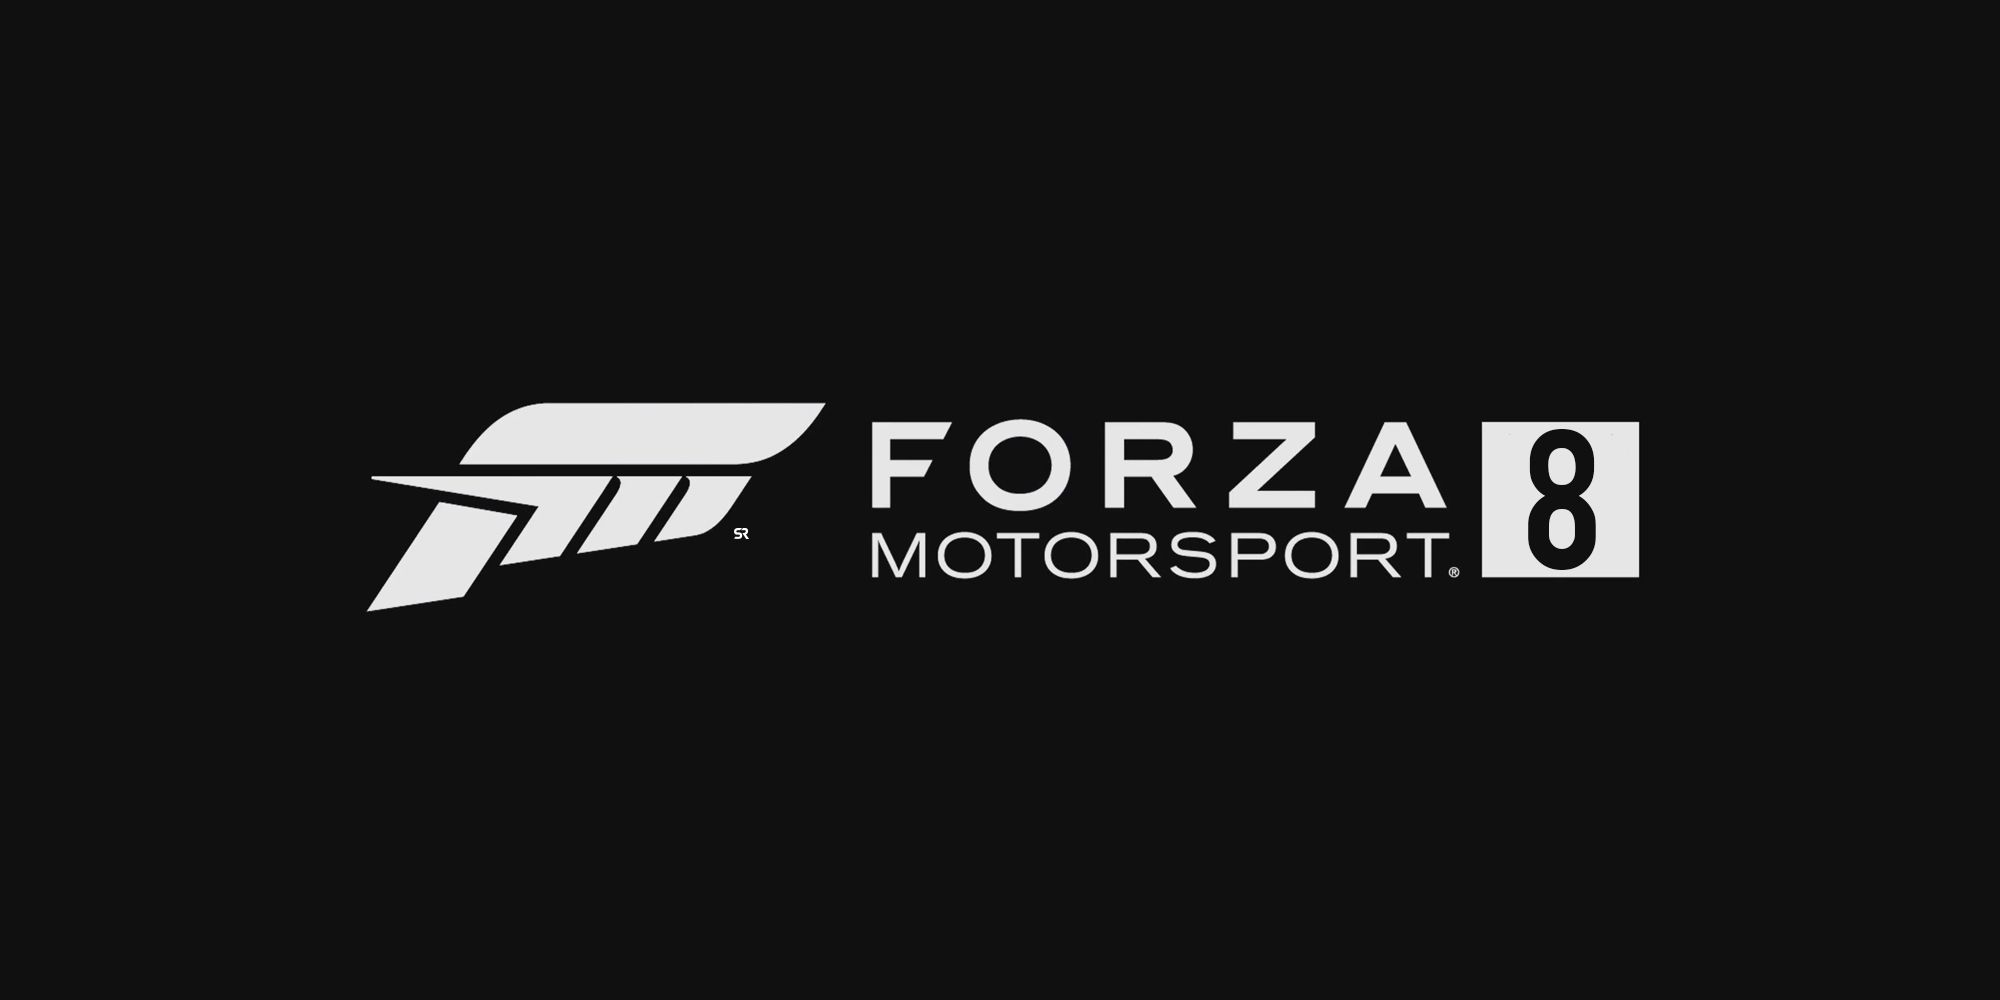 download forza 8